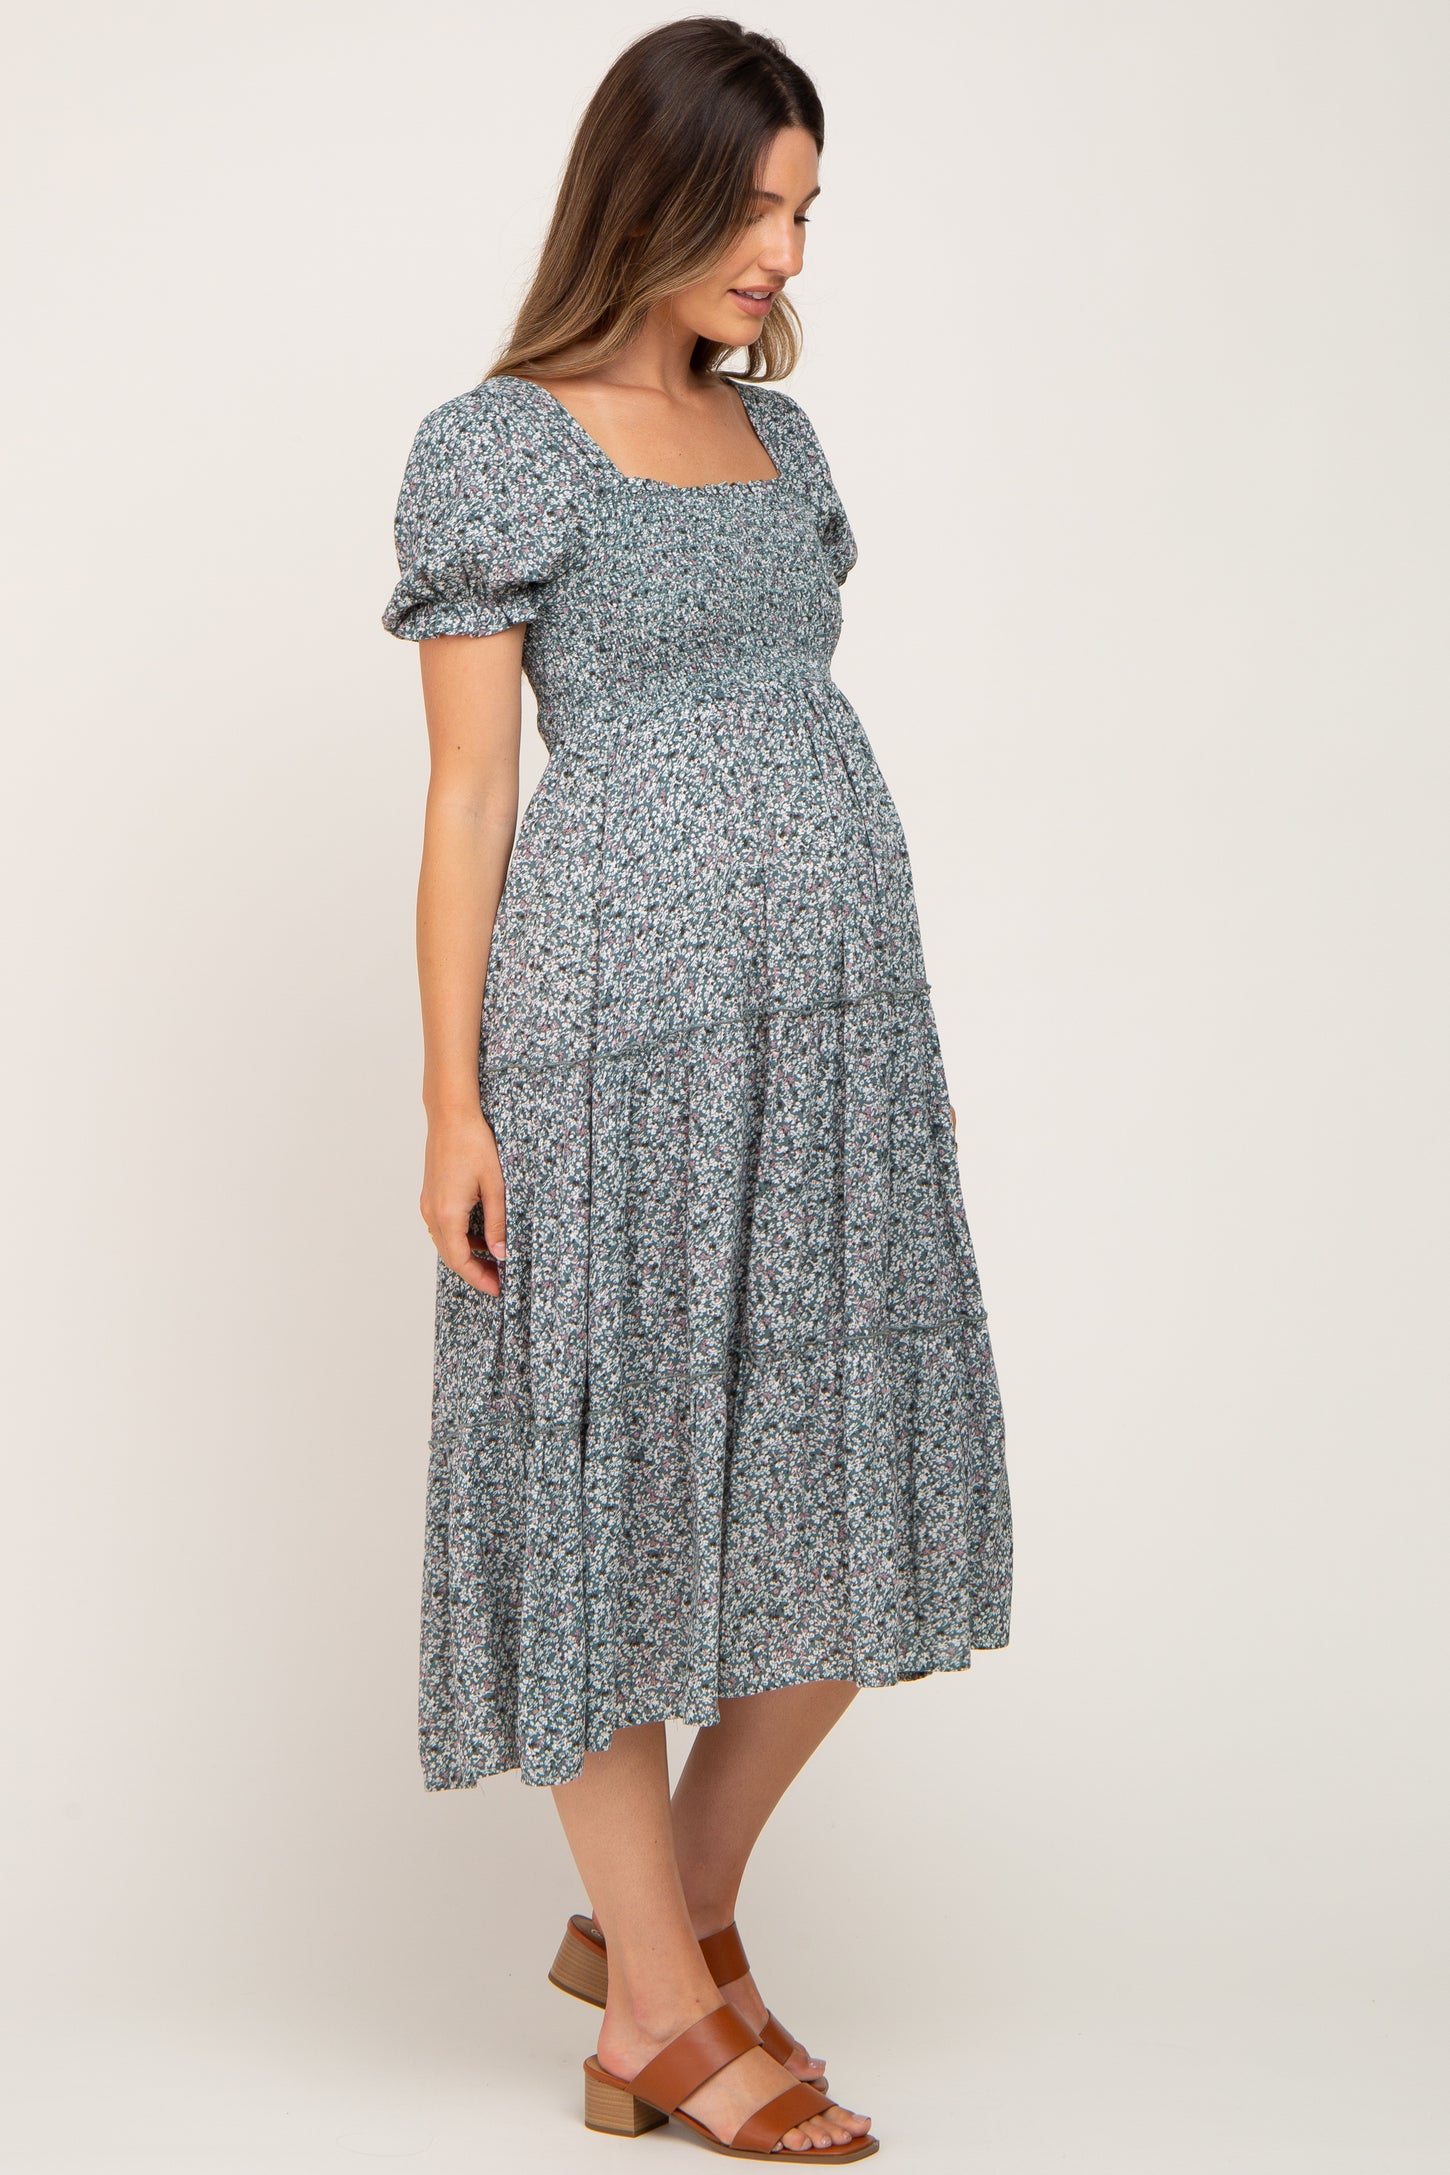 Teal Ditsy Floral Smocked Tiered Maternity Midi Dress